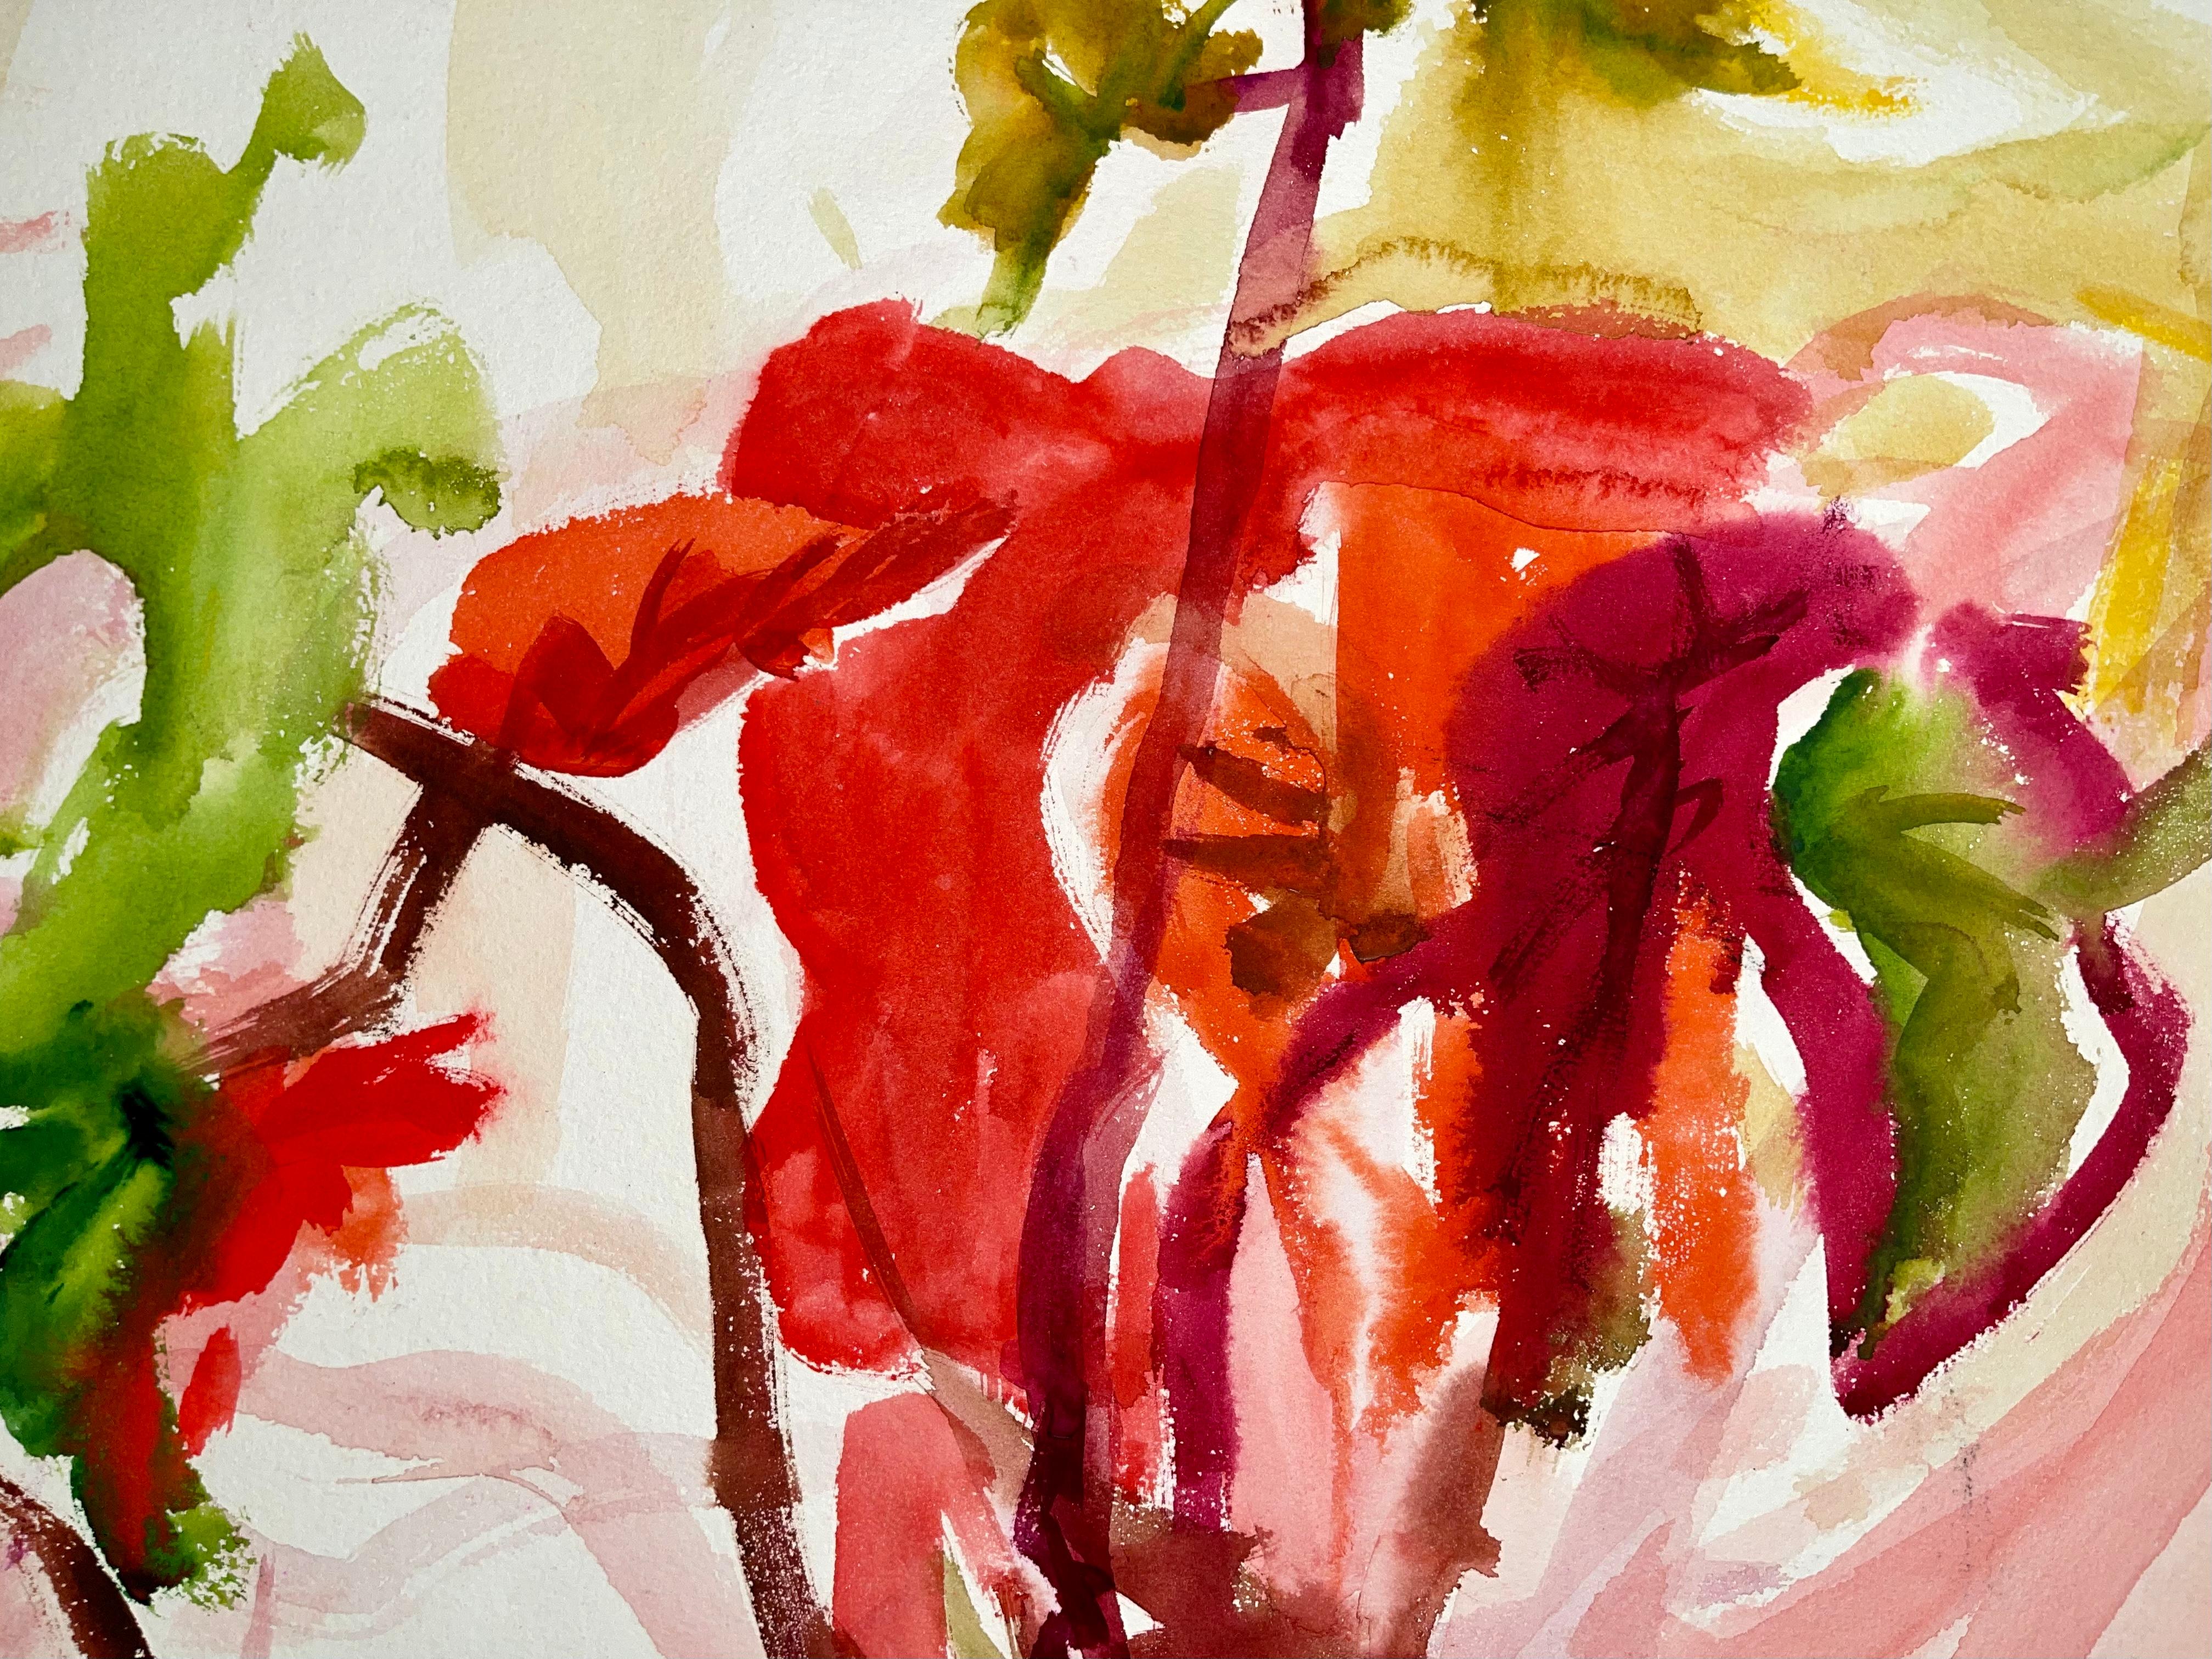 Artist: Ian Hornak (1944-2002)
Title: Untitled (Abstract Summer Still Life with Flowers and Plants)
Year: 1963
Medium: Watercolor on heavy archival paper
Size: 29.5 x 21 inches
Condition: Good
Provenance: Estate of Ian Hornak, East Hampton,